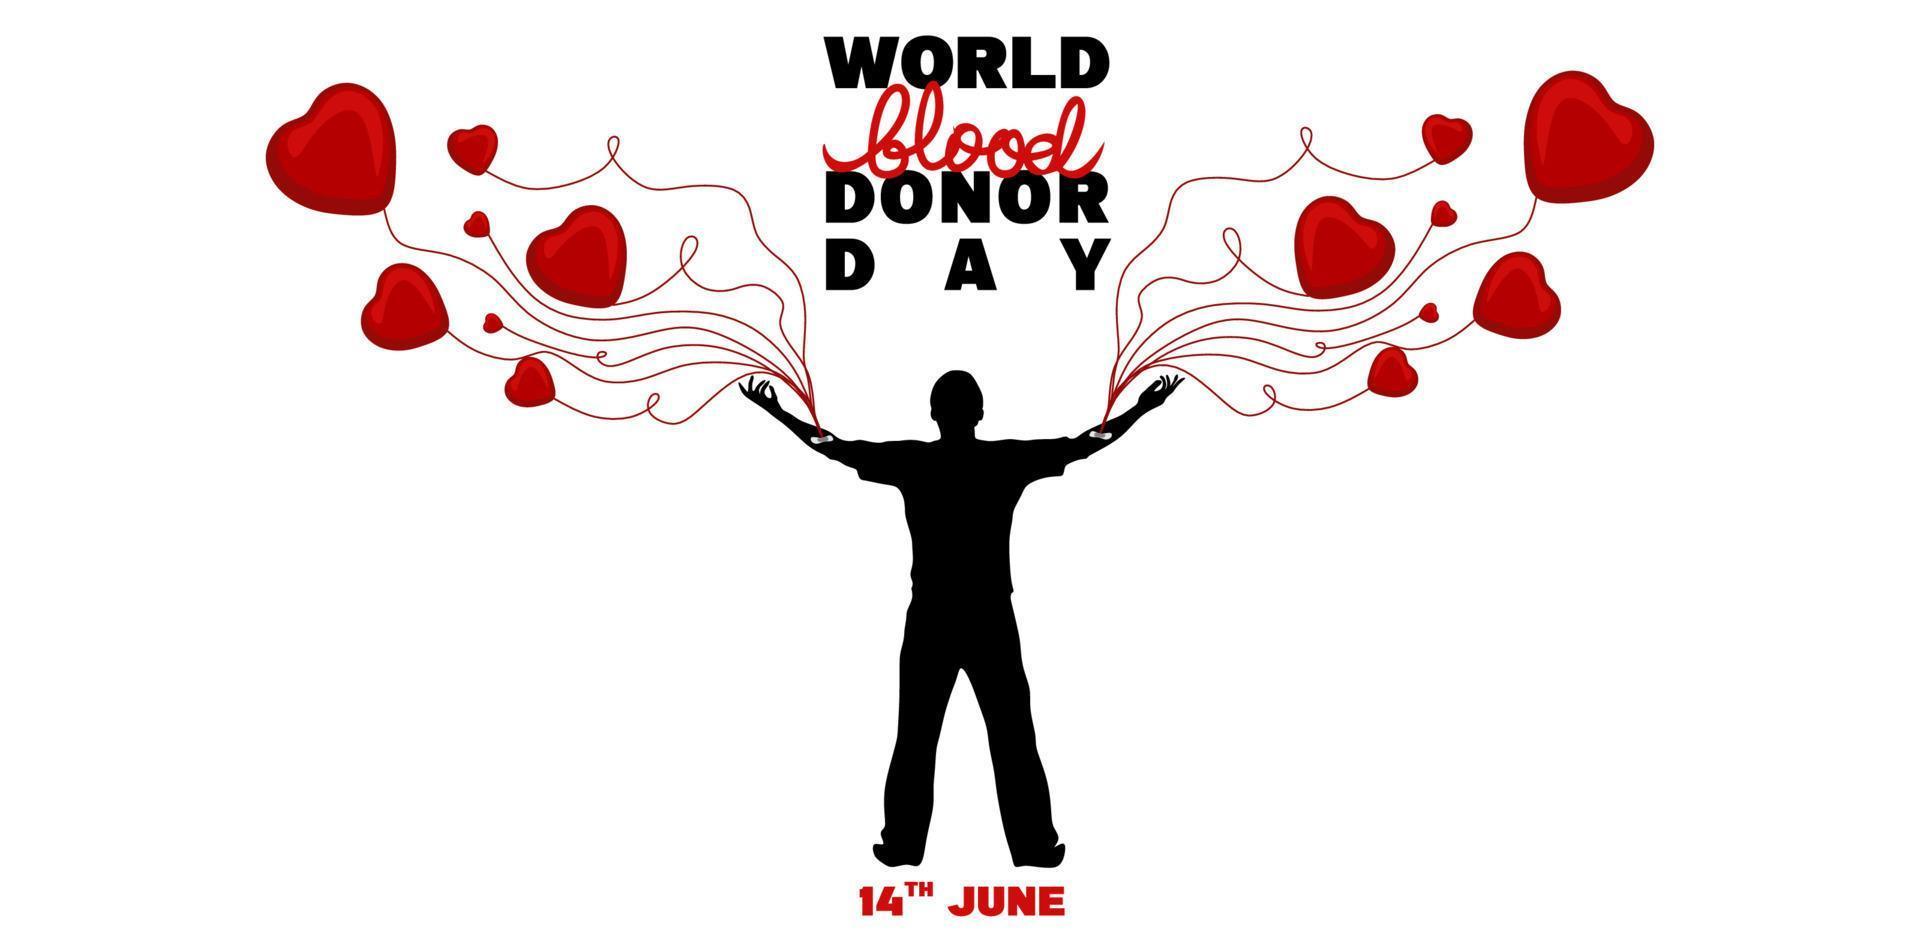 World blood donor day poster, Human donates blood, blood bag, heart and human silhouette vector